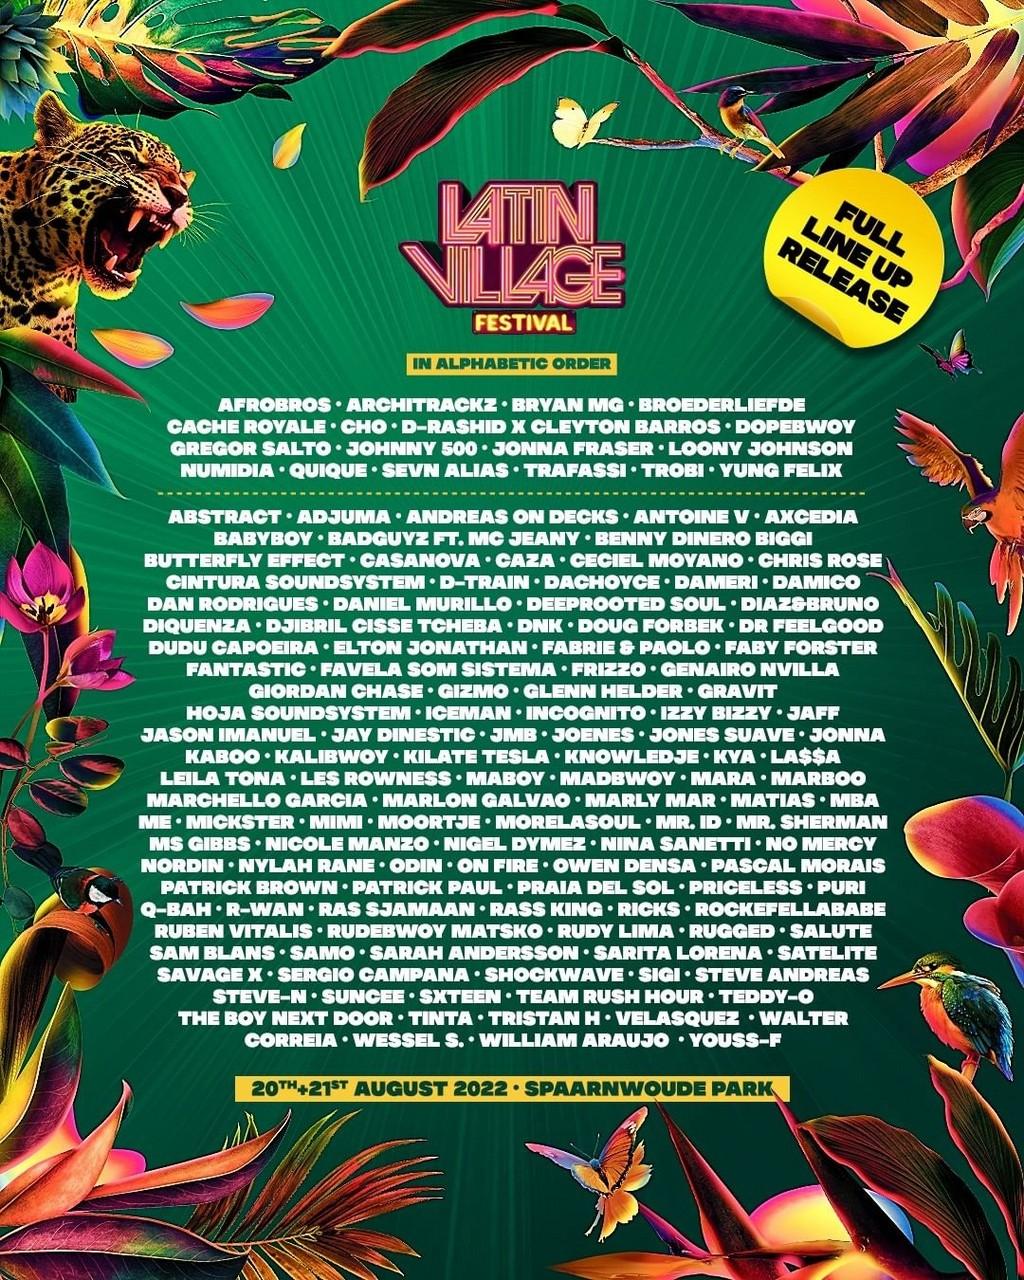 Lineup Poster LatinVillage Festival 2022